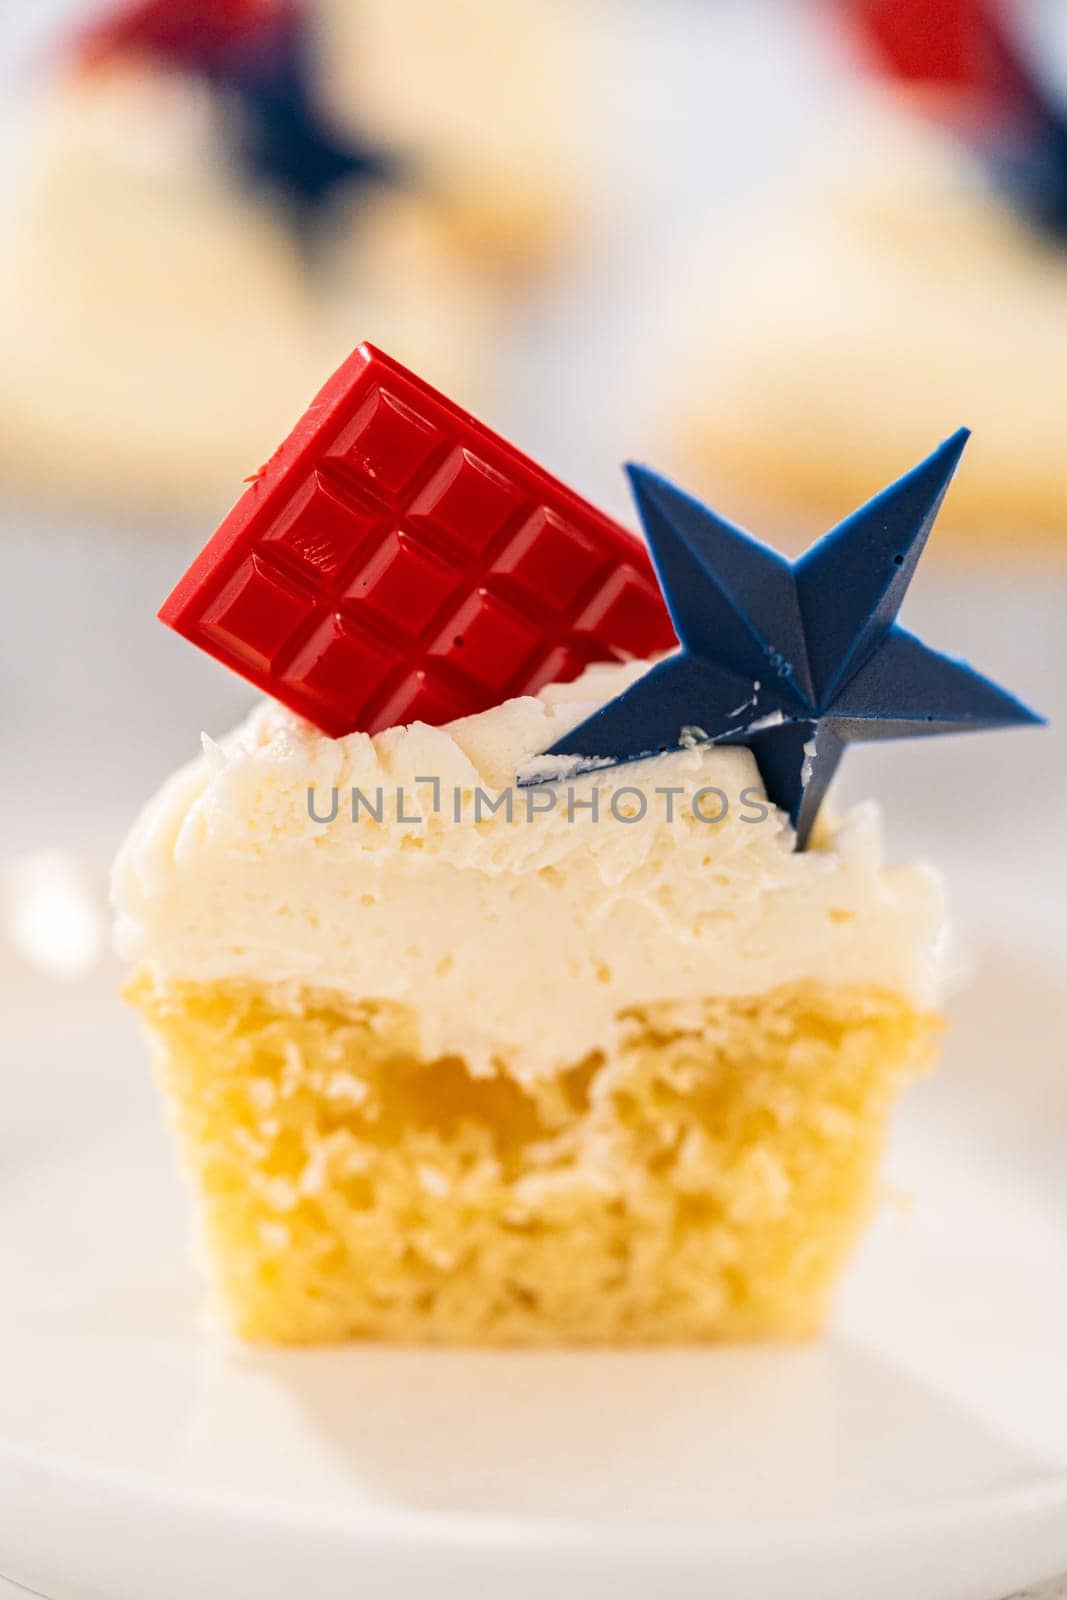 Sliced lemon cupcakes with lemon buttercream frosting, and decorated with patriotic blue chocolate star and red mini chocolate.